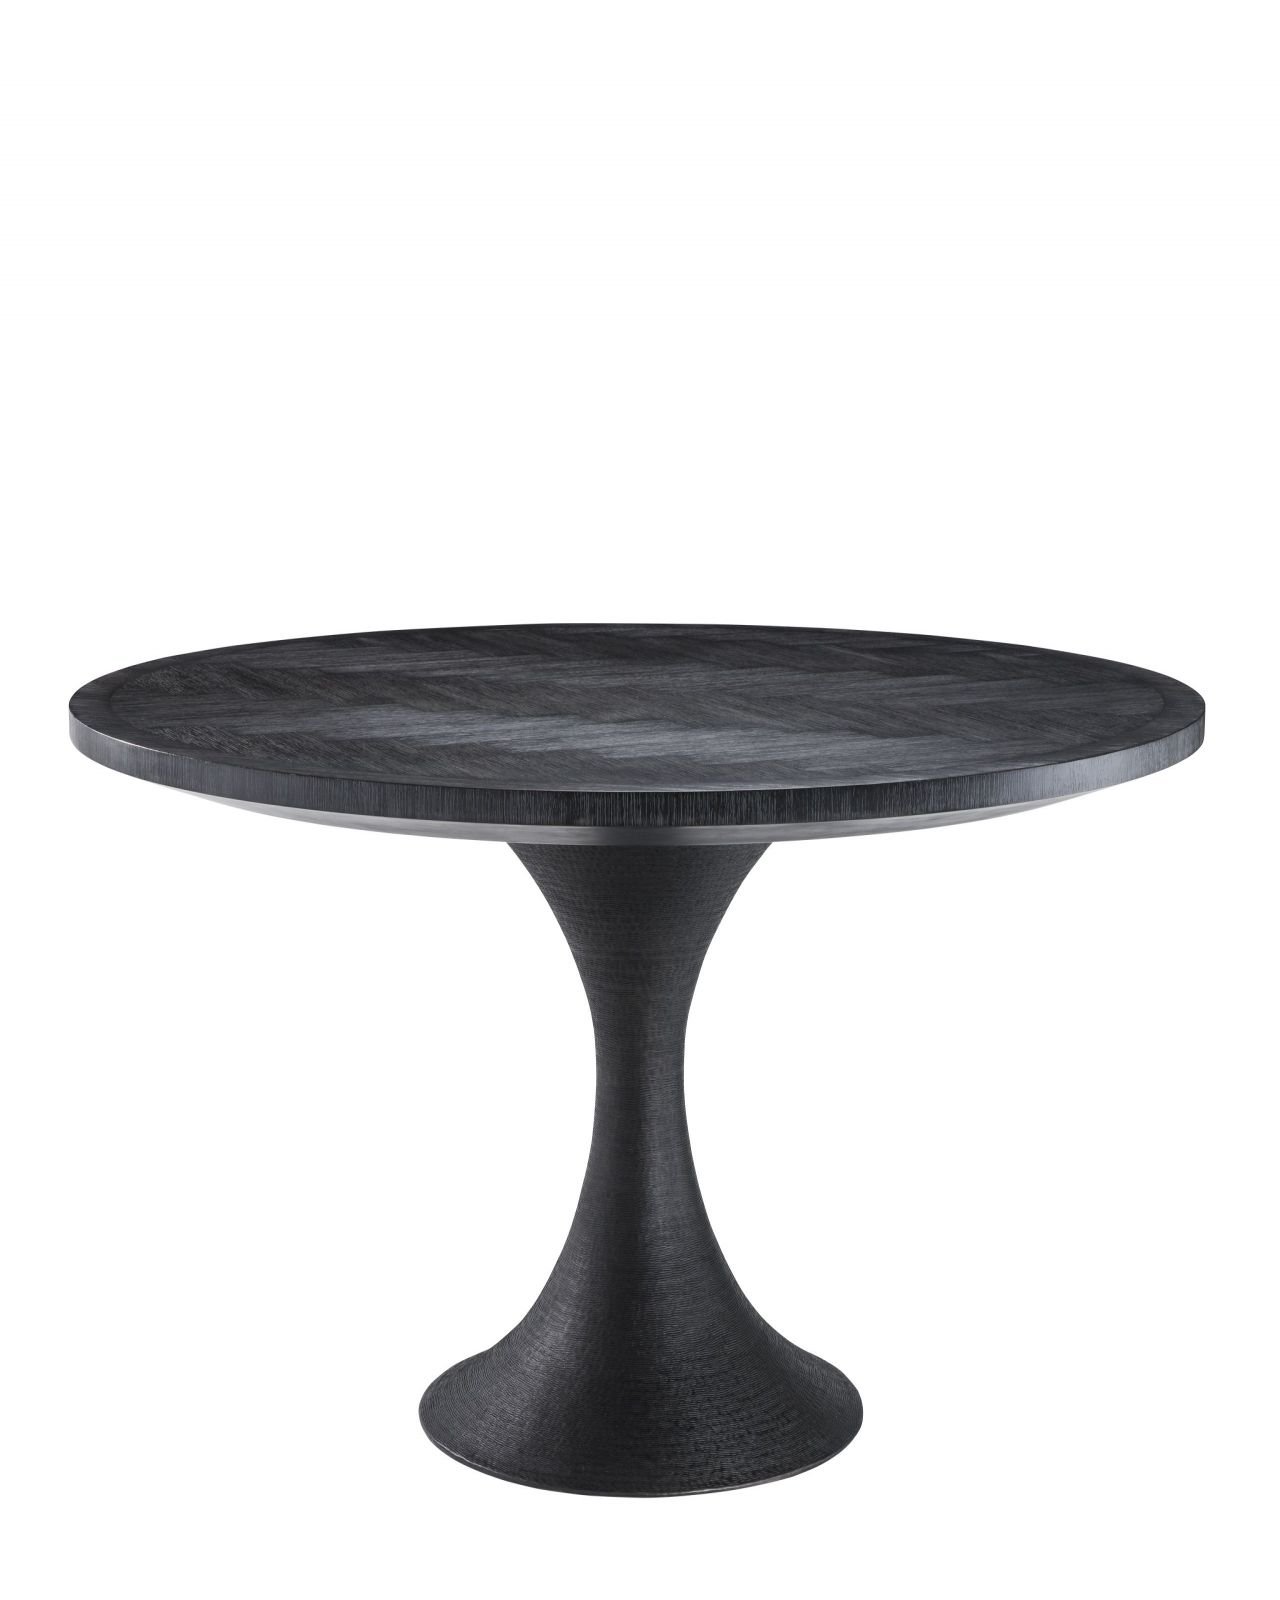 Melchior dining table round charcoal